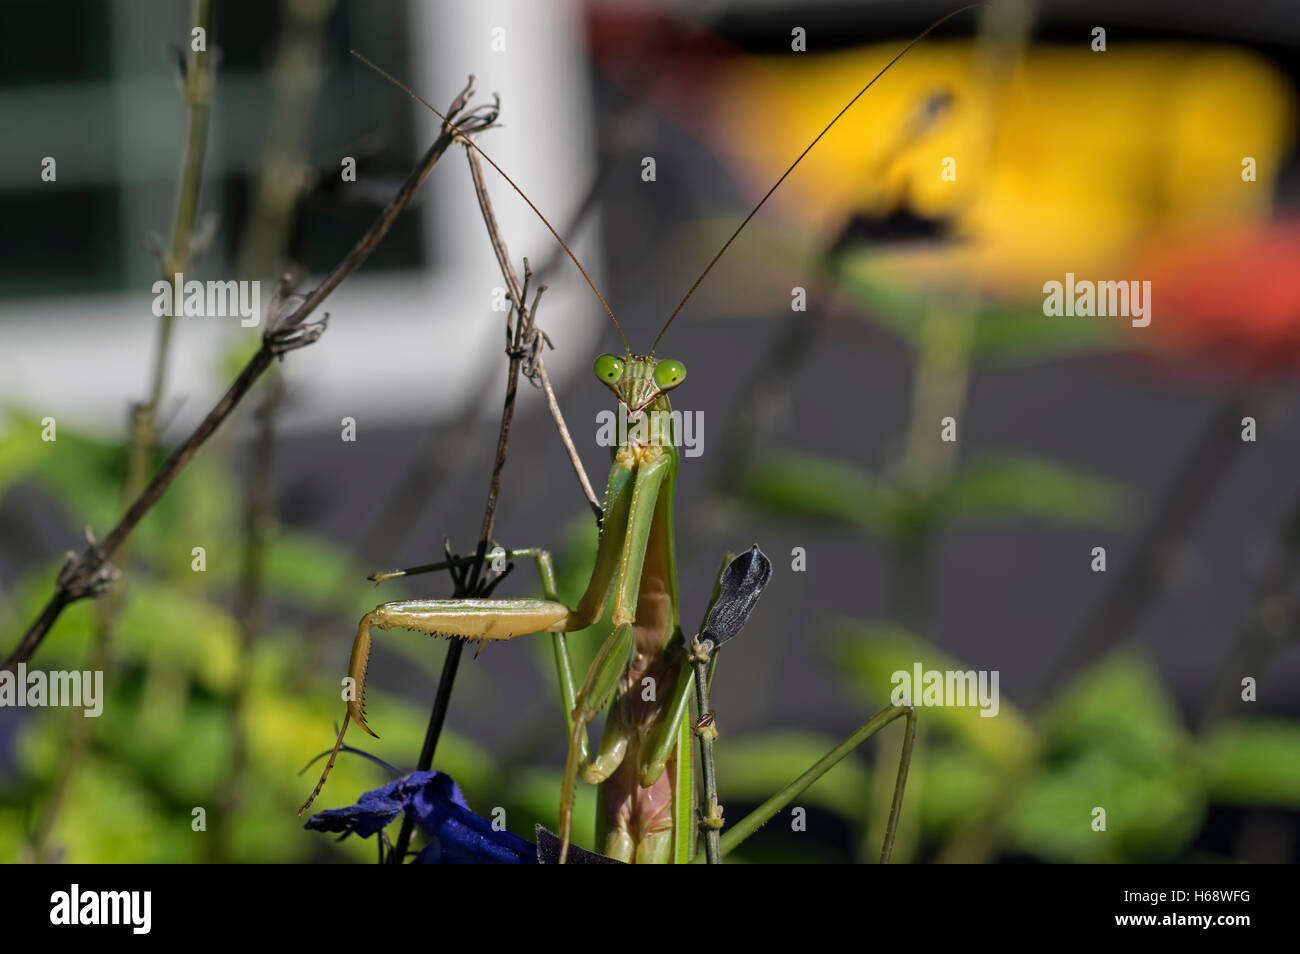 Praying Mantis. Mantises are an order of insects with over 2,400 species and about 430 genera in 15 families. Stock Photo